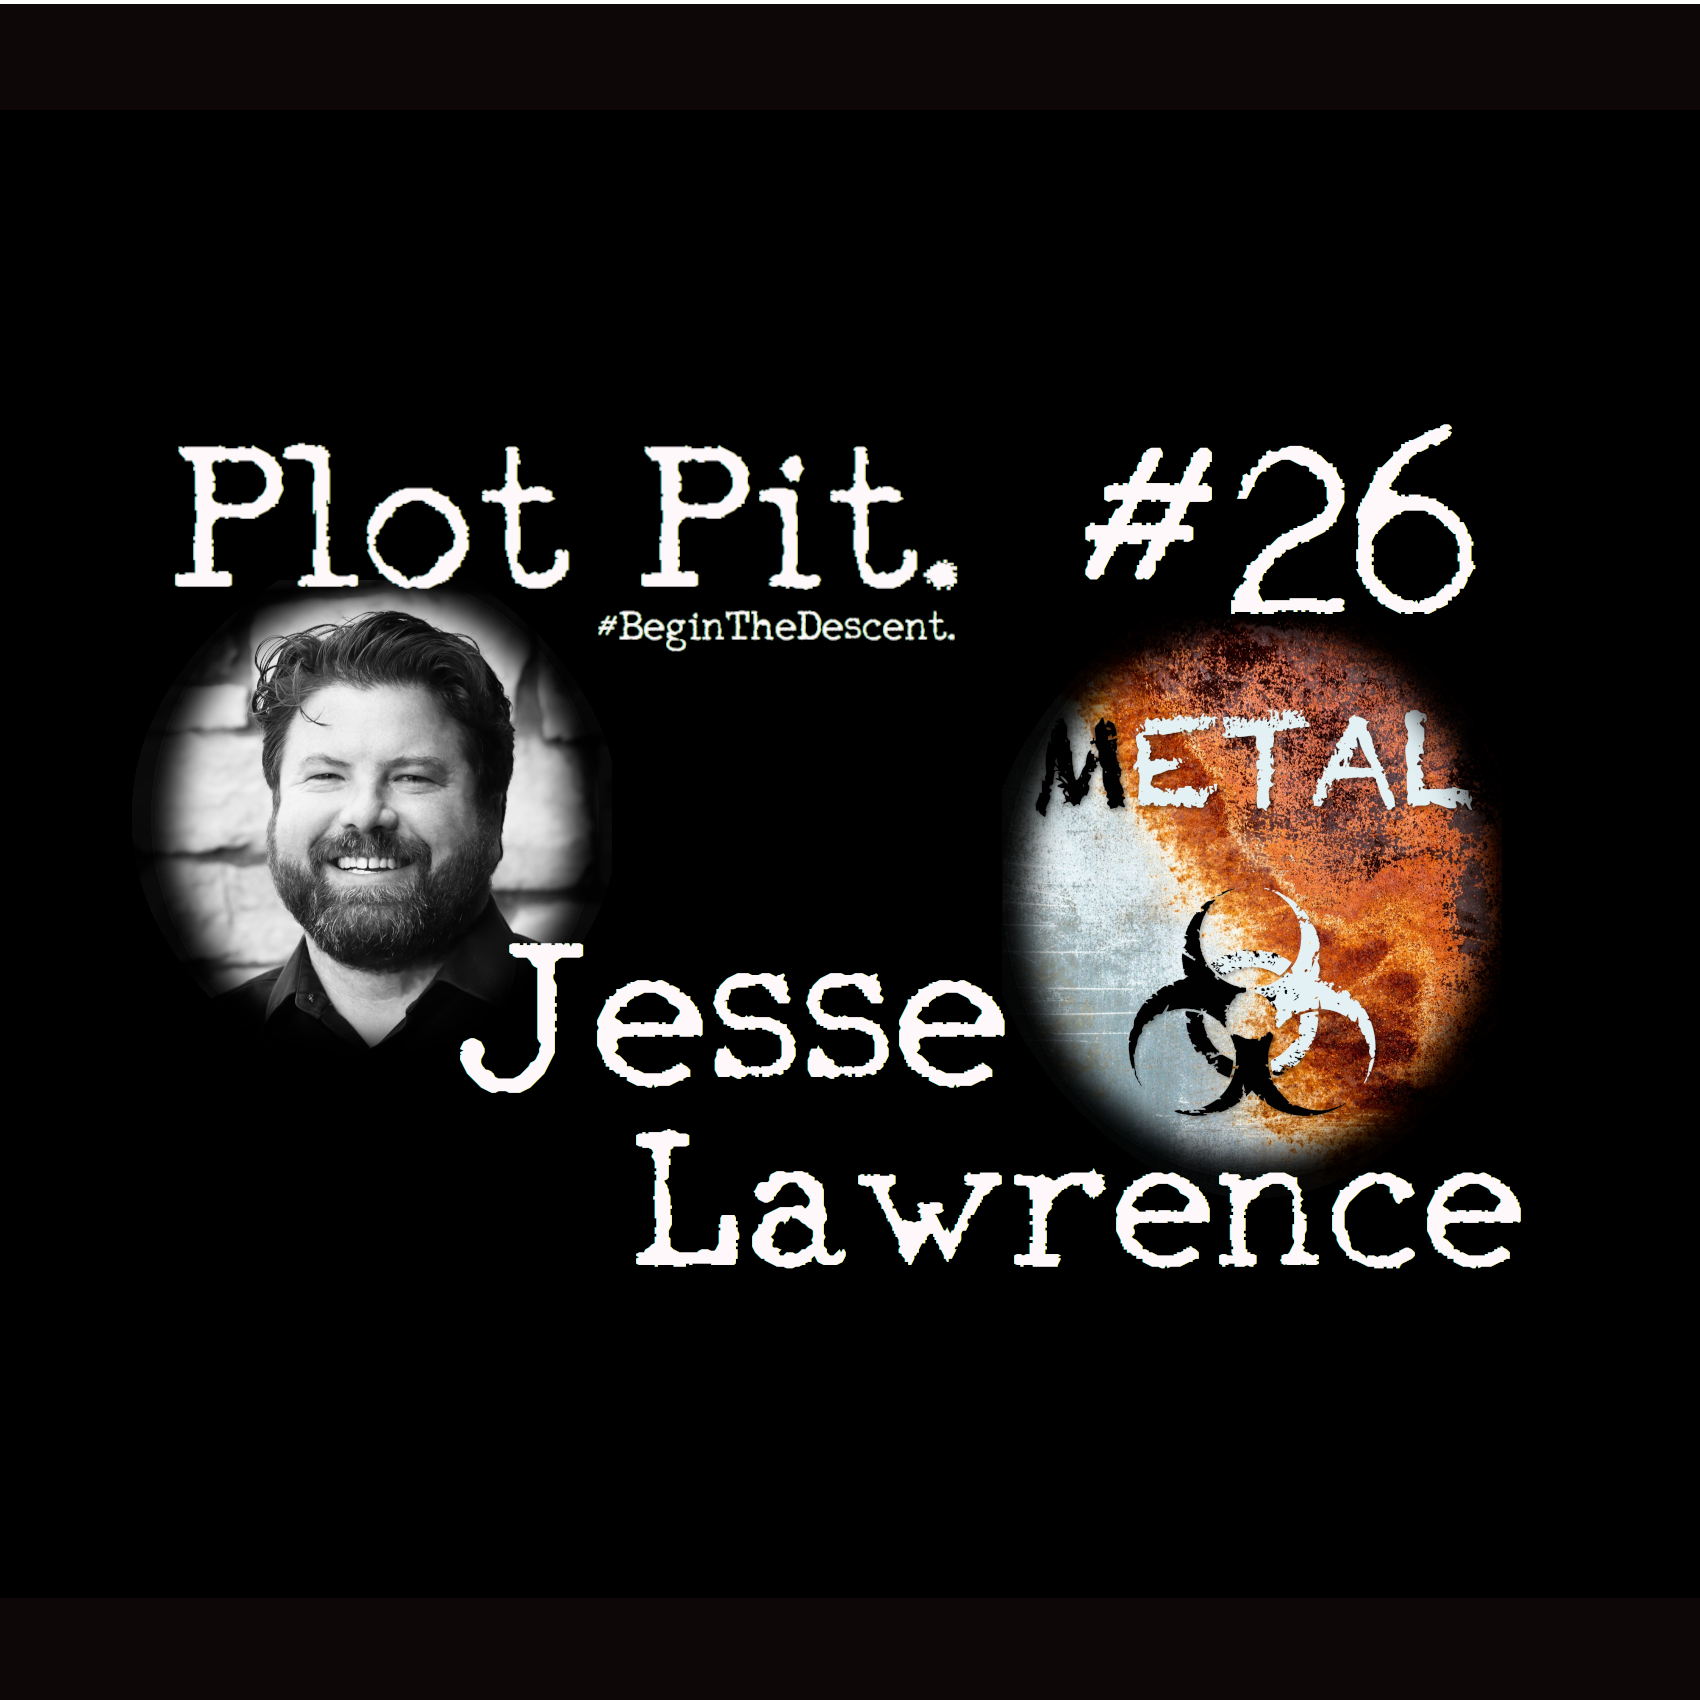 Being Jesse F. Lawrence